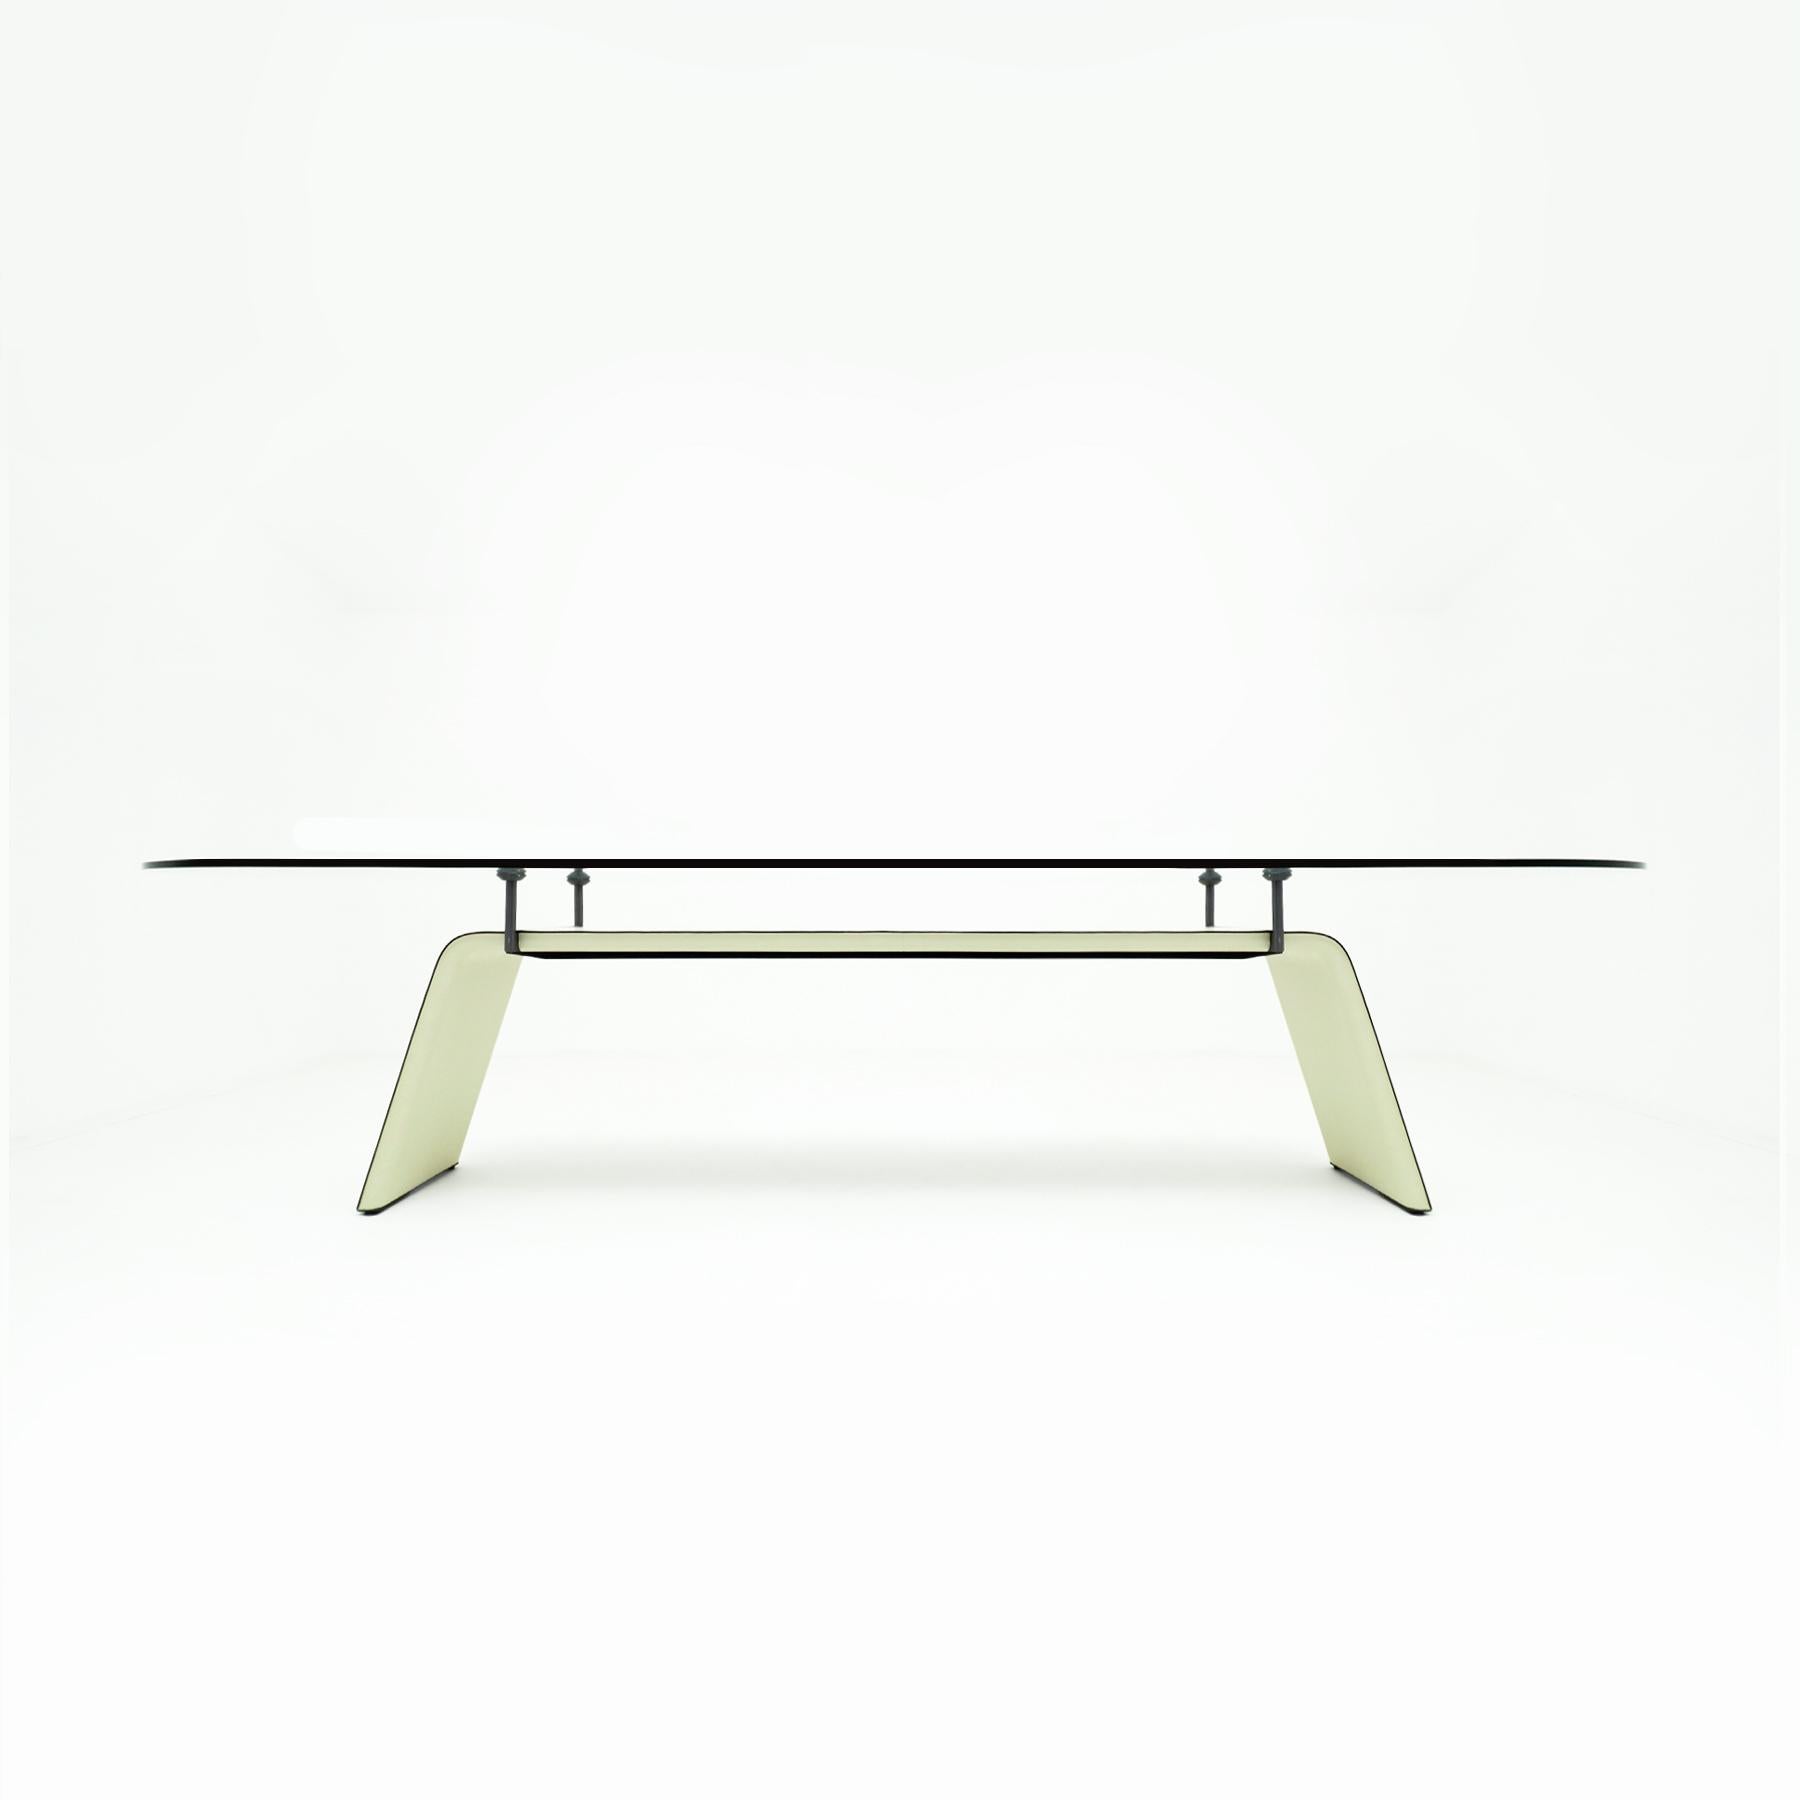 A beautifully designed and constructed Matteo Grassi cream leather and glass dining, or conference, table with a steel core base that has been upholstered in cream leather and that features a thick glass, floating table top. The table can, depending